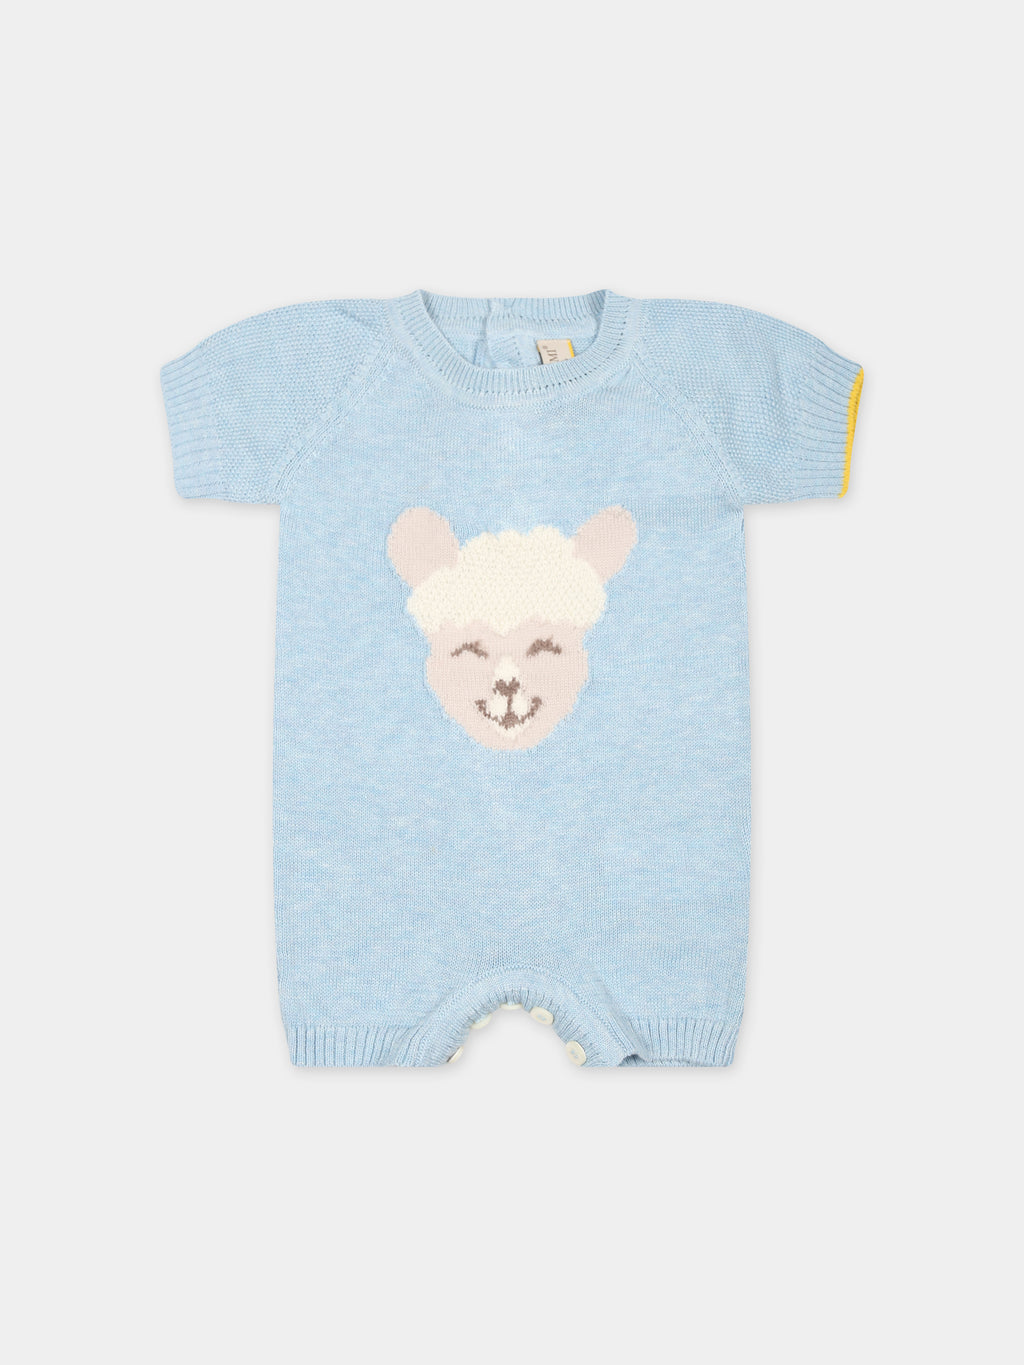 Light blue romper for baby boy with alpachino